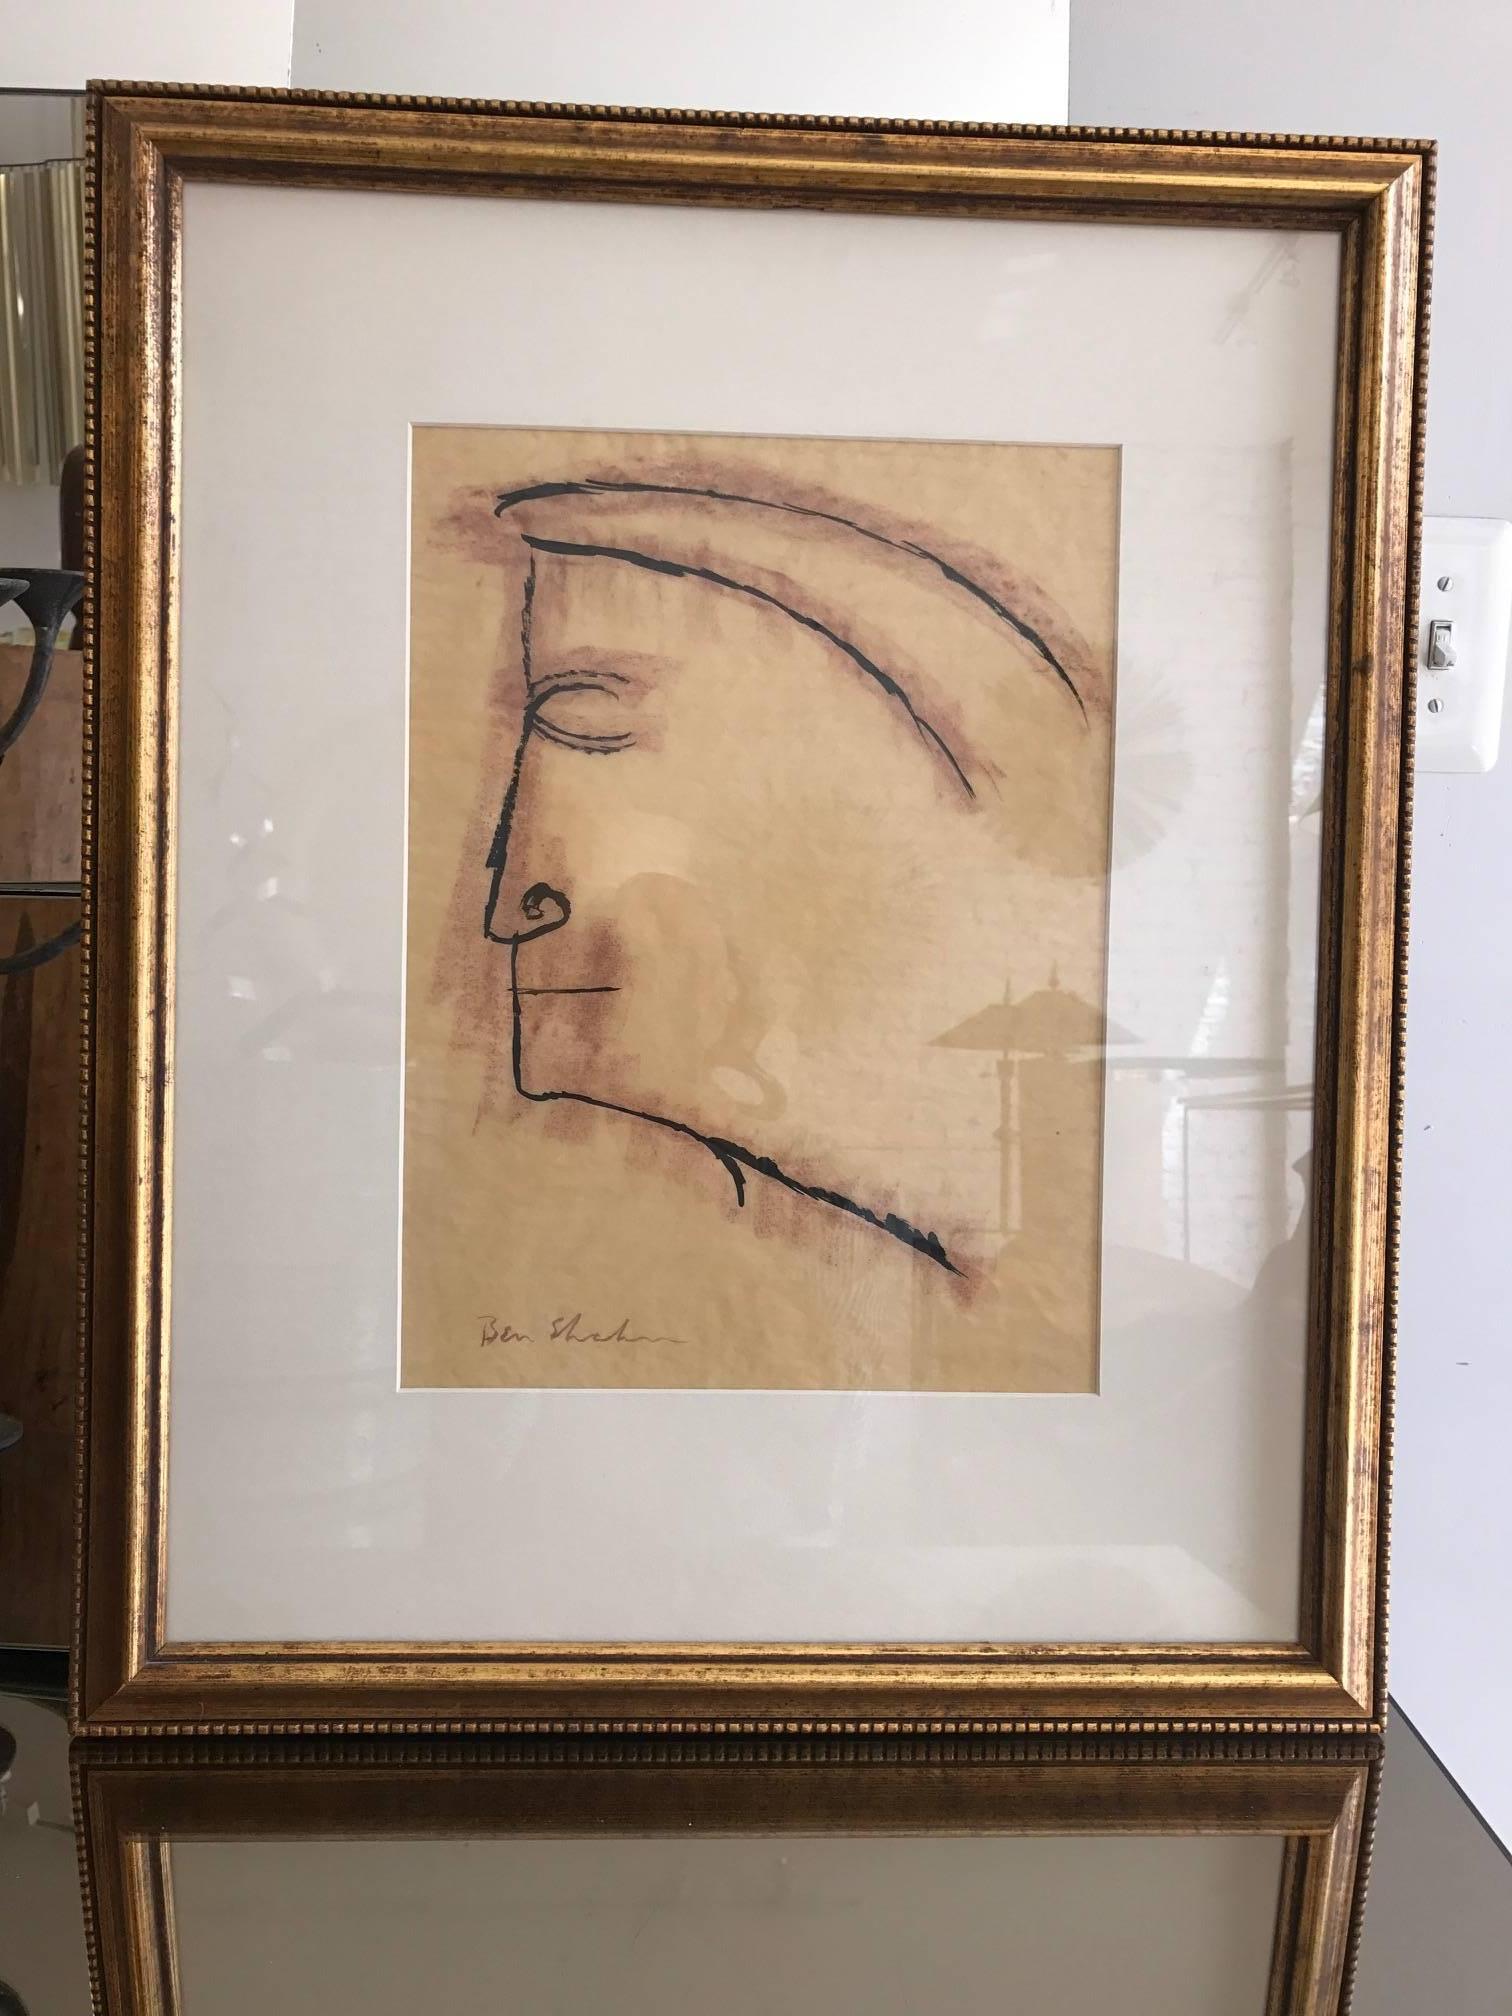 A 1951 Ben Shahn (1898-1969) drawing entitled Profile. A great modern Cubist work by a well listed accomplished artist. Shahn is best known for his works of social realism and his left wing political views. The work itself measures 14 x 10.5.